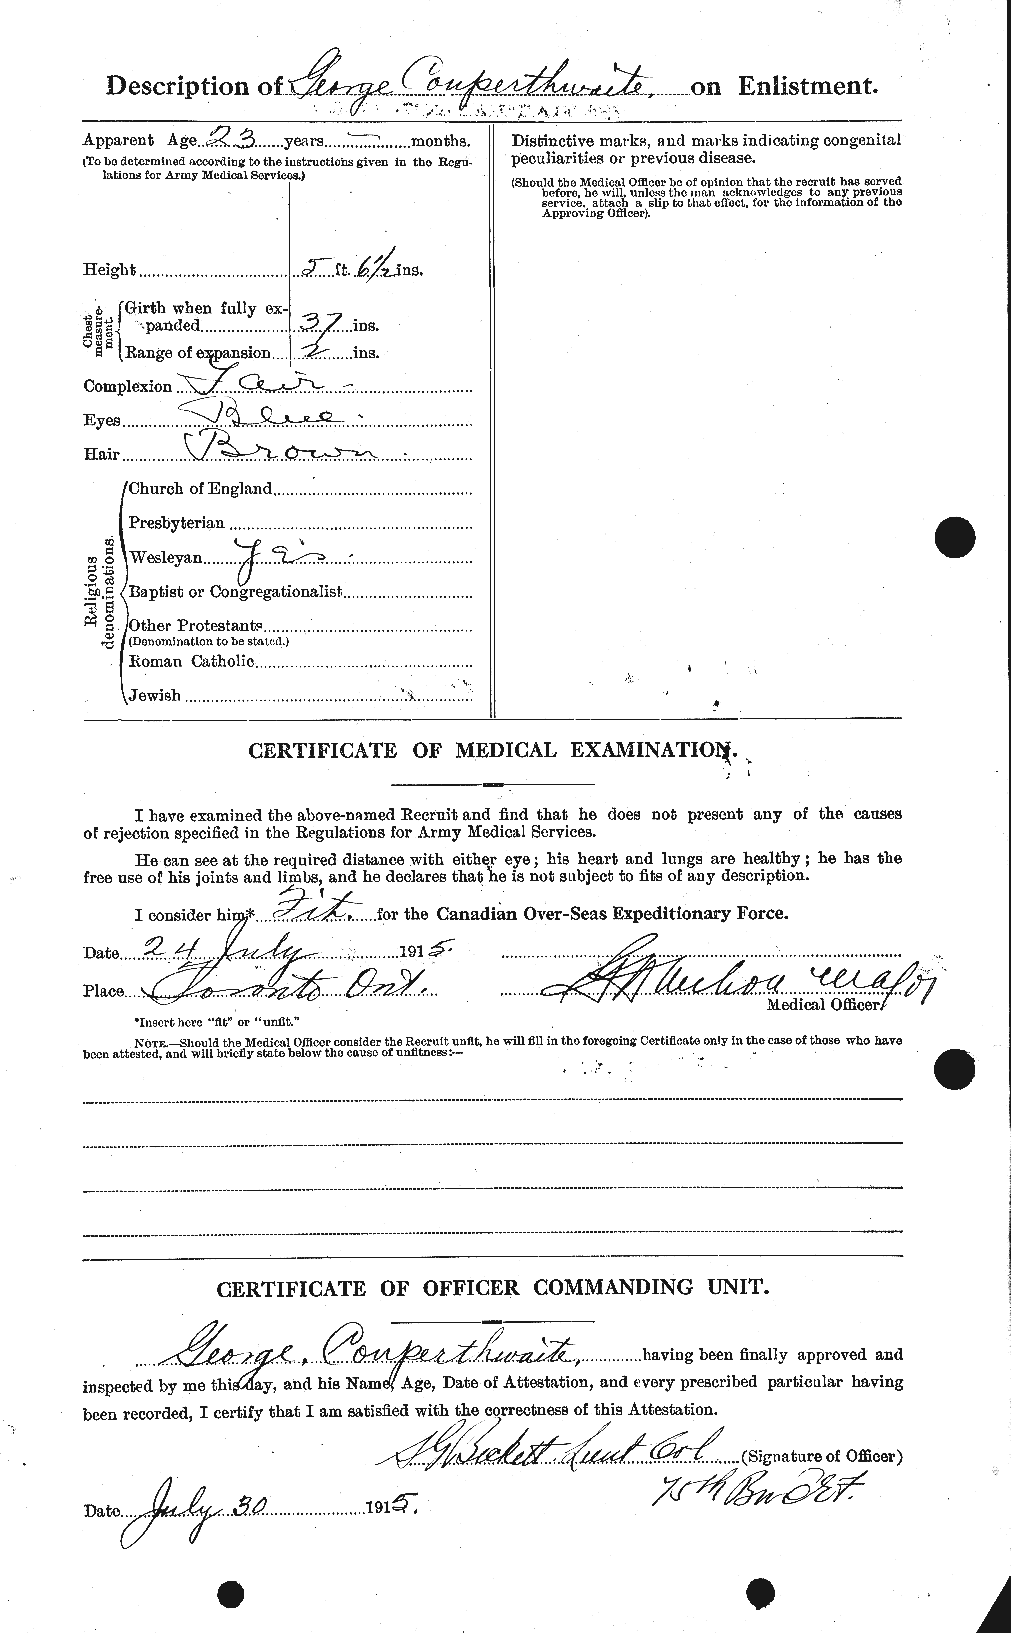 Personnel Records of the First World War - CEF 062412b